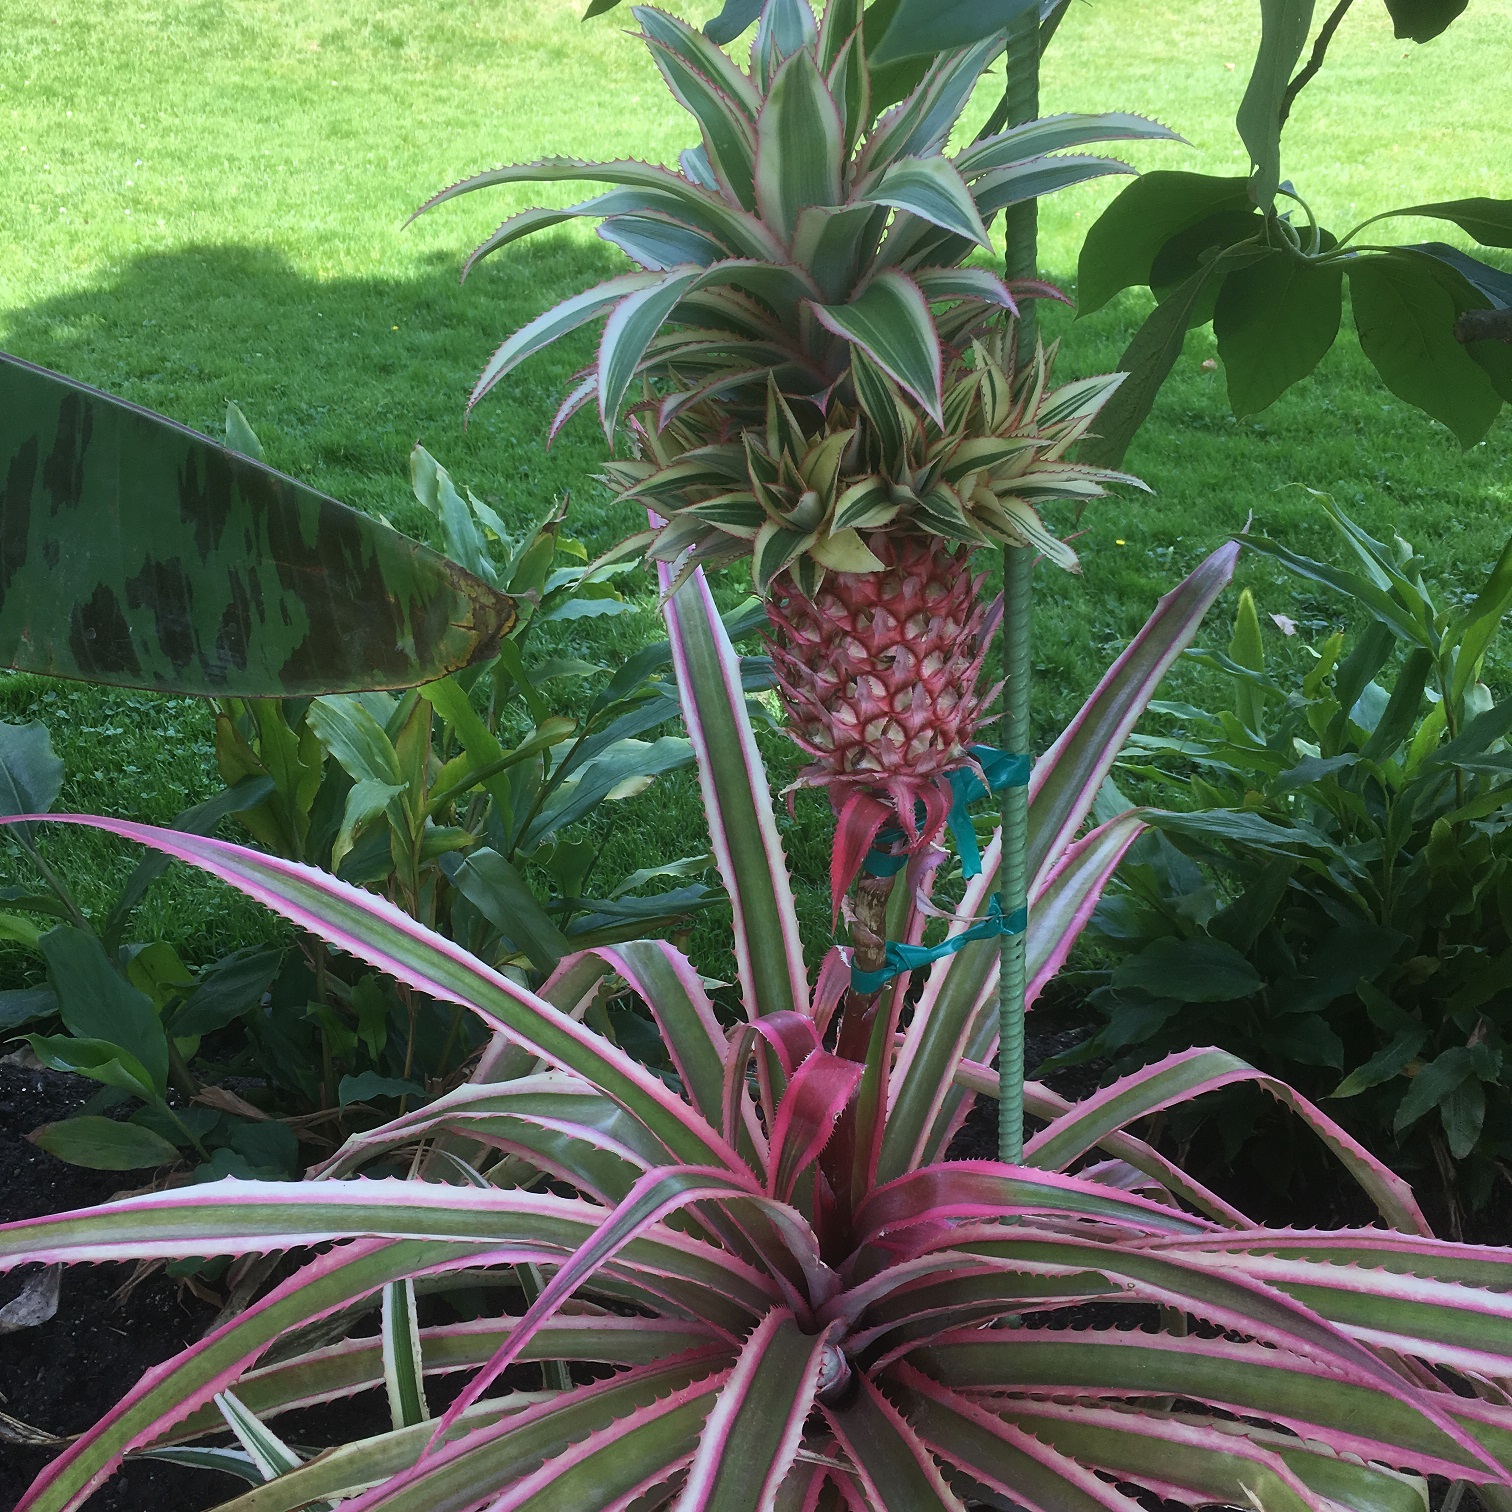 A pink pineapple sits on top of its leafy green foliage